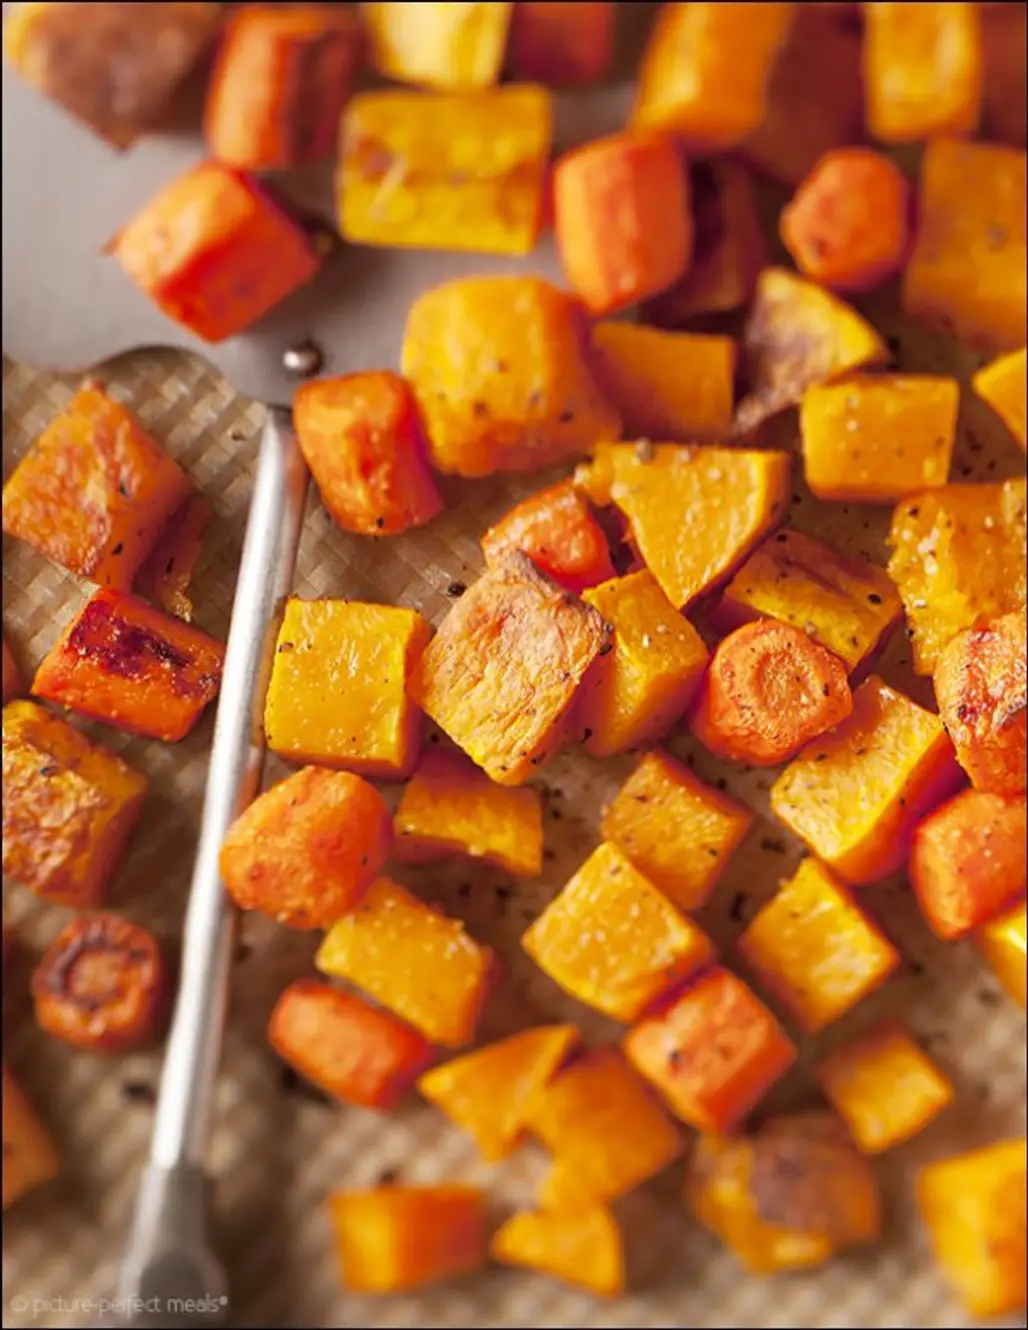 Roasted Squash, Perfect for THAT Family Member